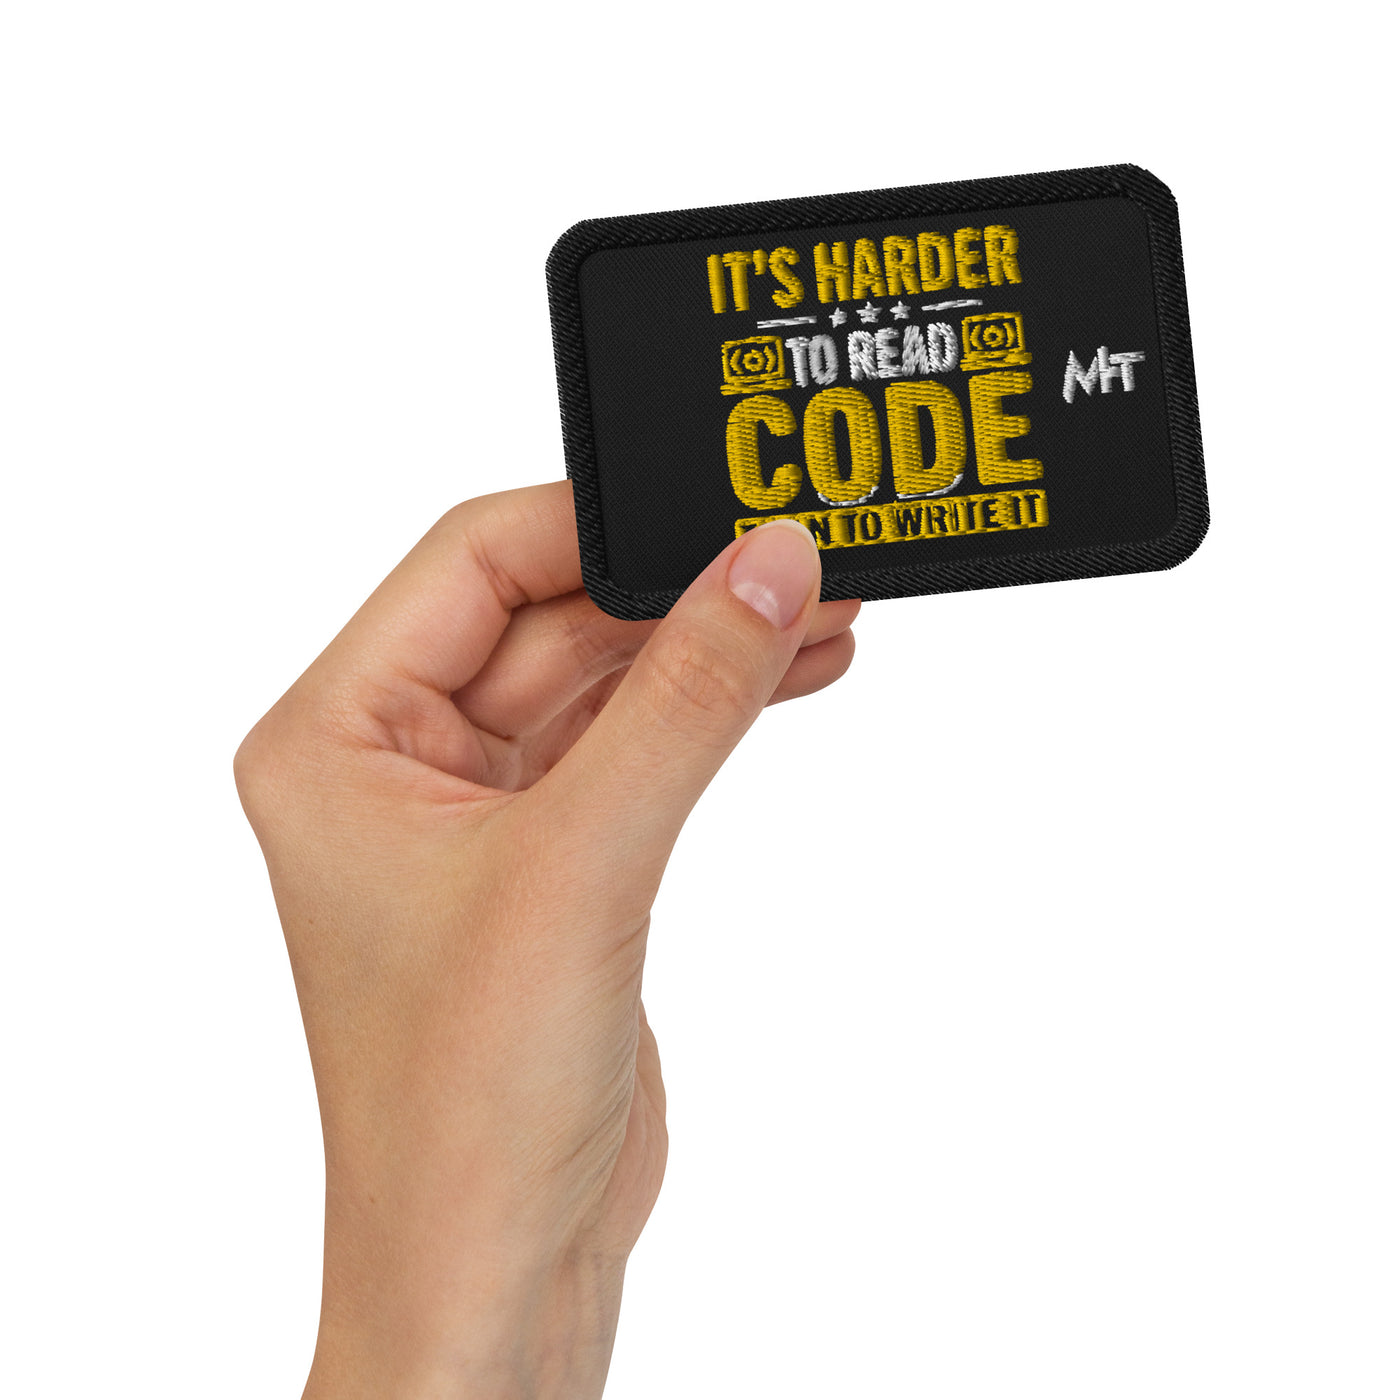 It's harder to read Code then to read it - Embroidered patches